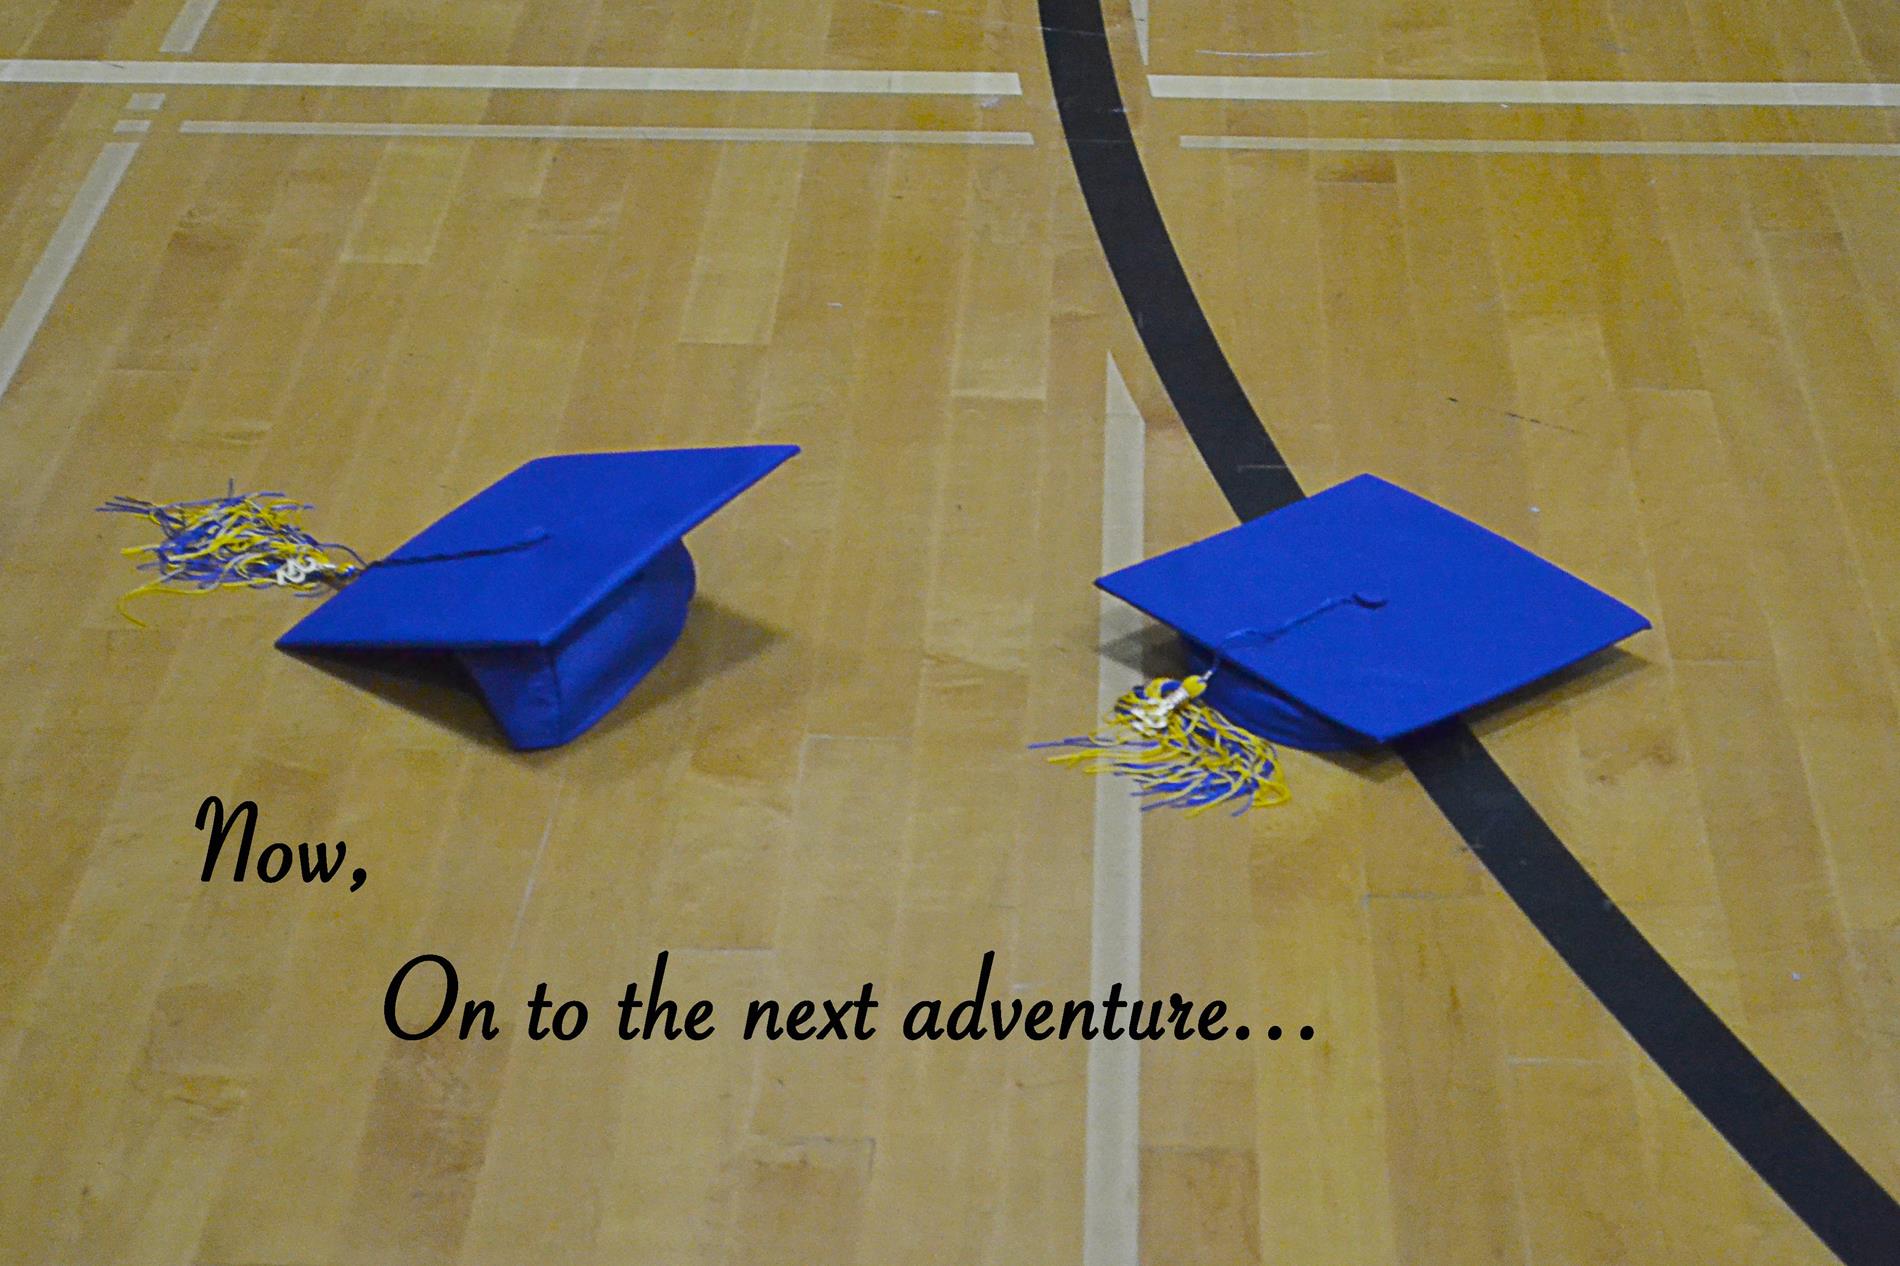 Two graduation caps and text: "Now, on to the next adventure..."